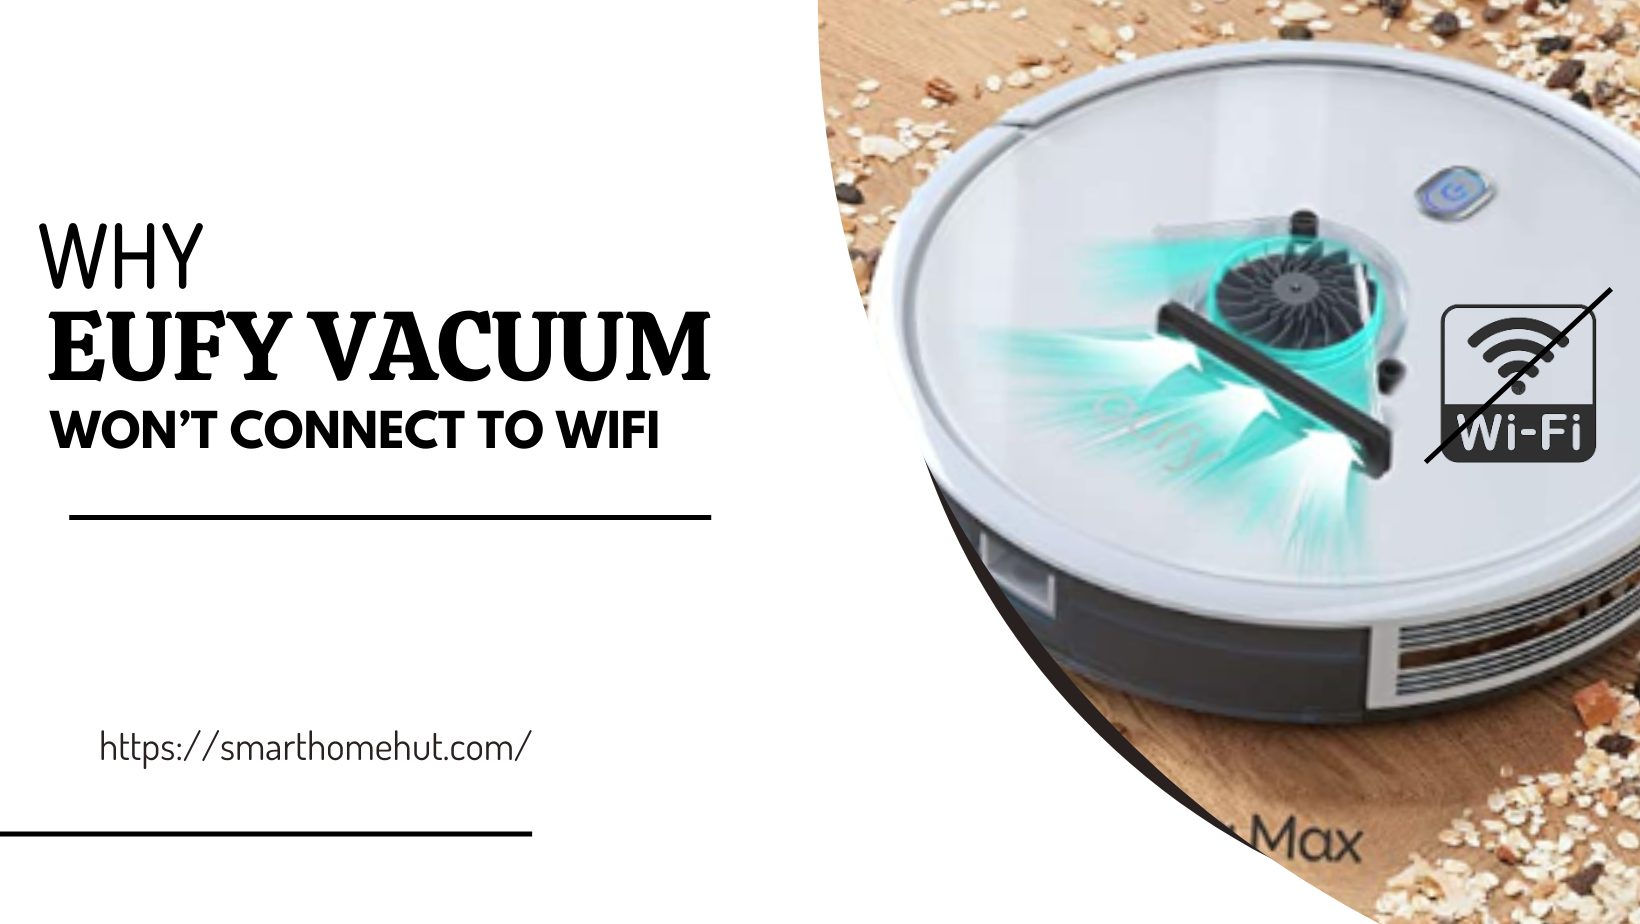 Why Eufy Vacuum Won’t Connect to WiFi